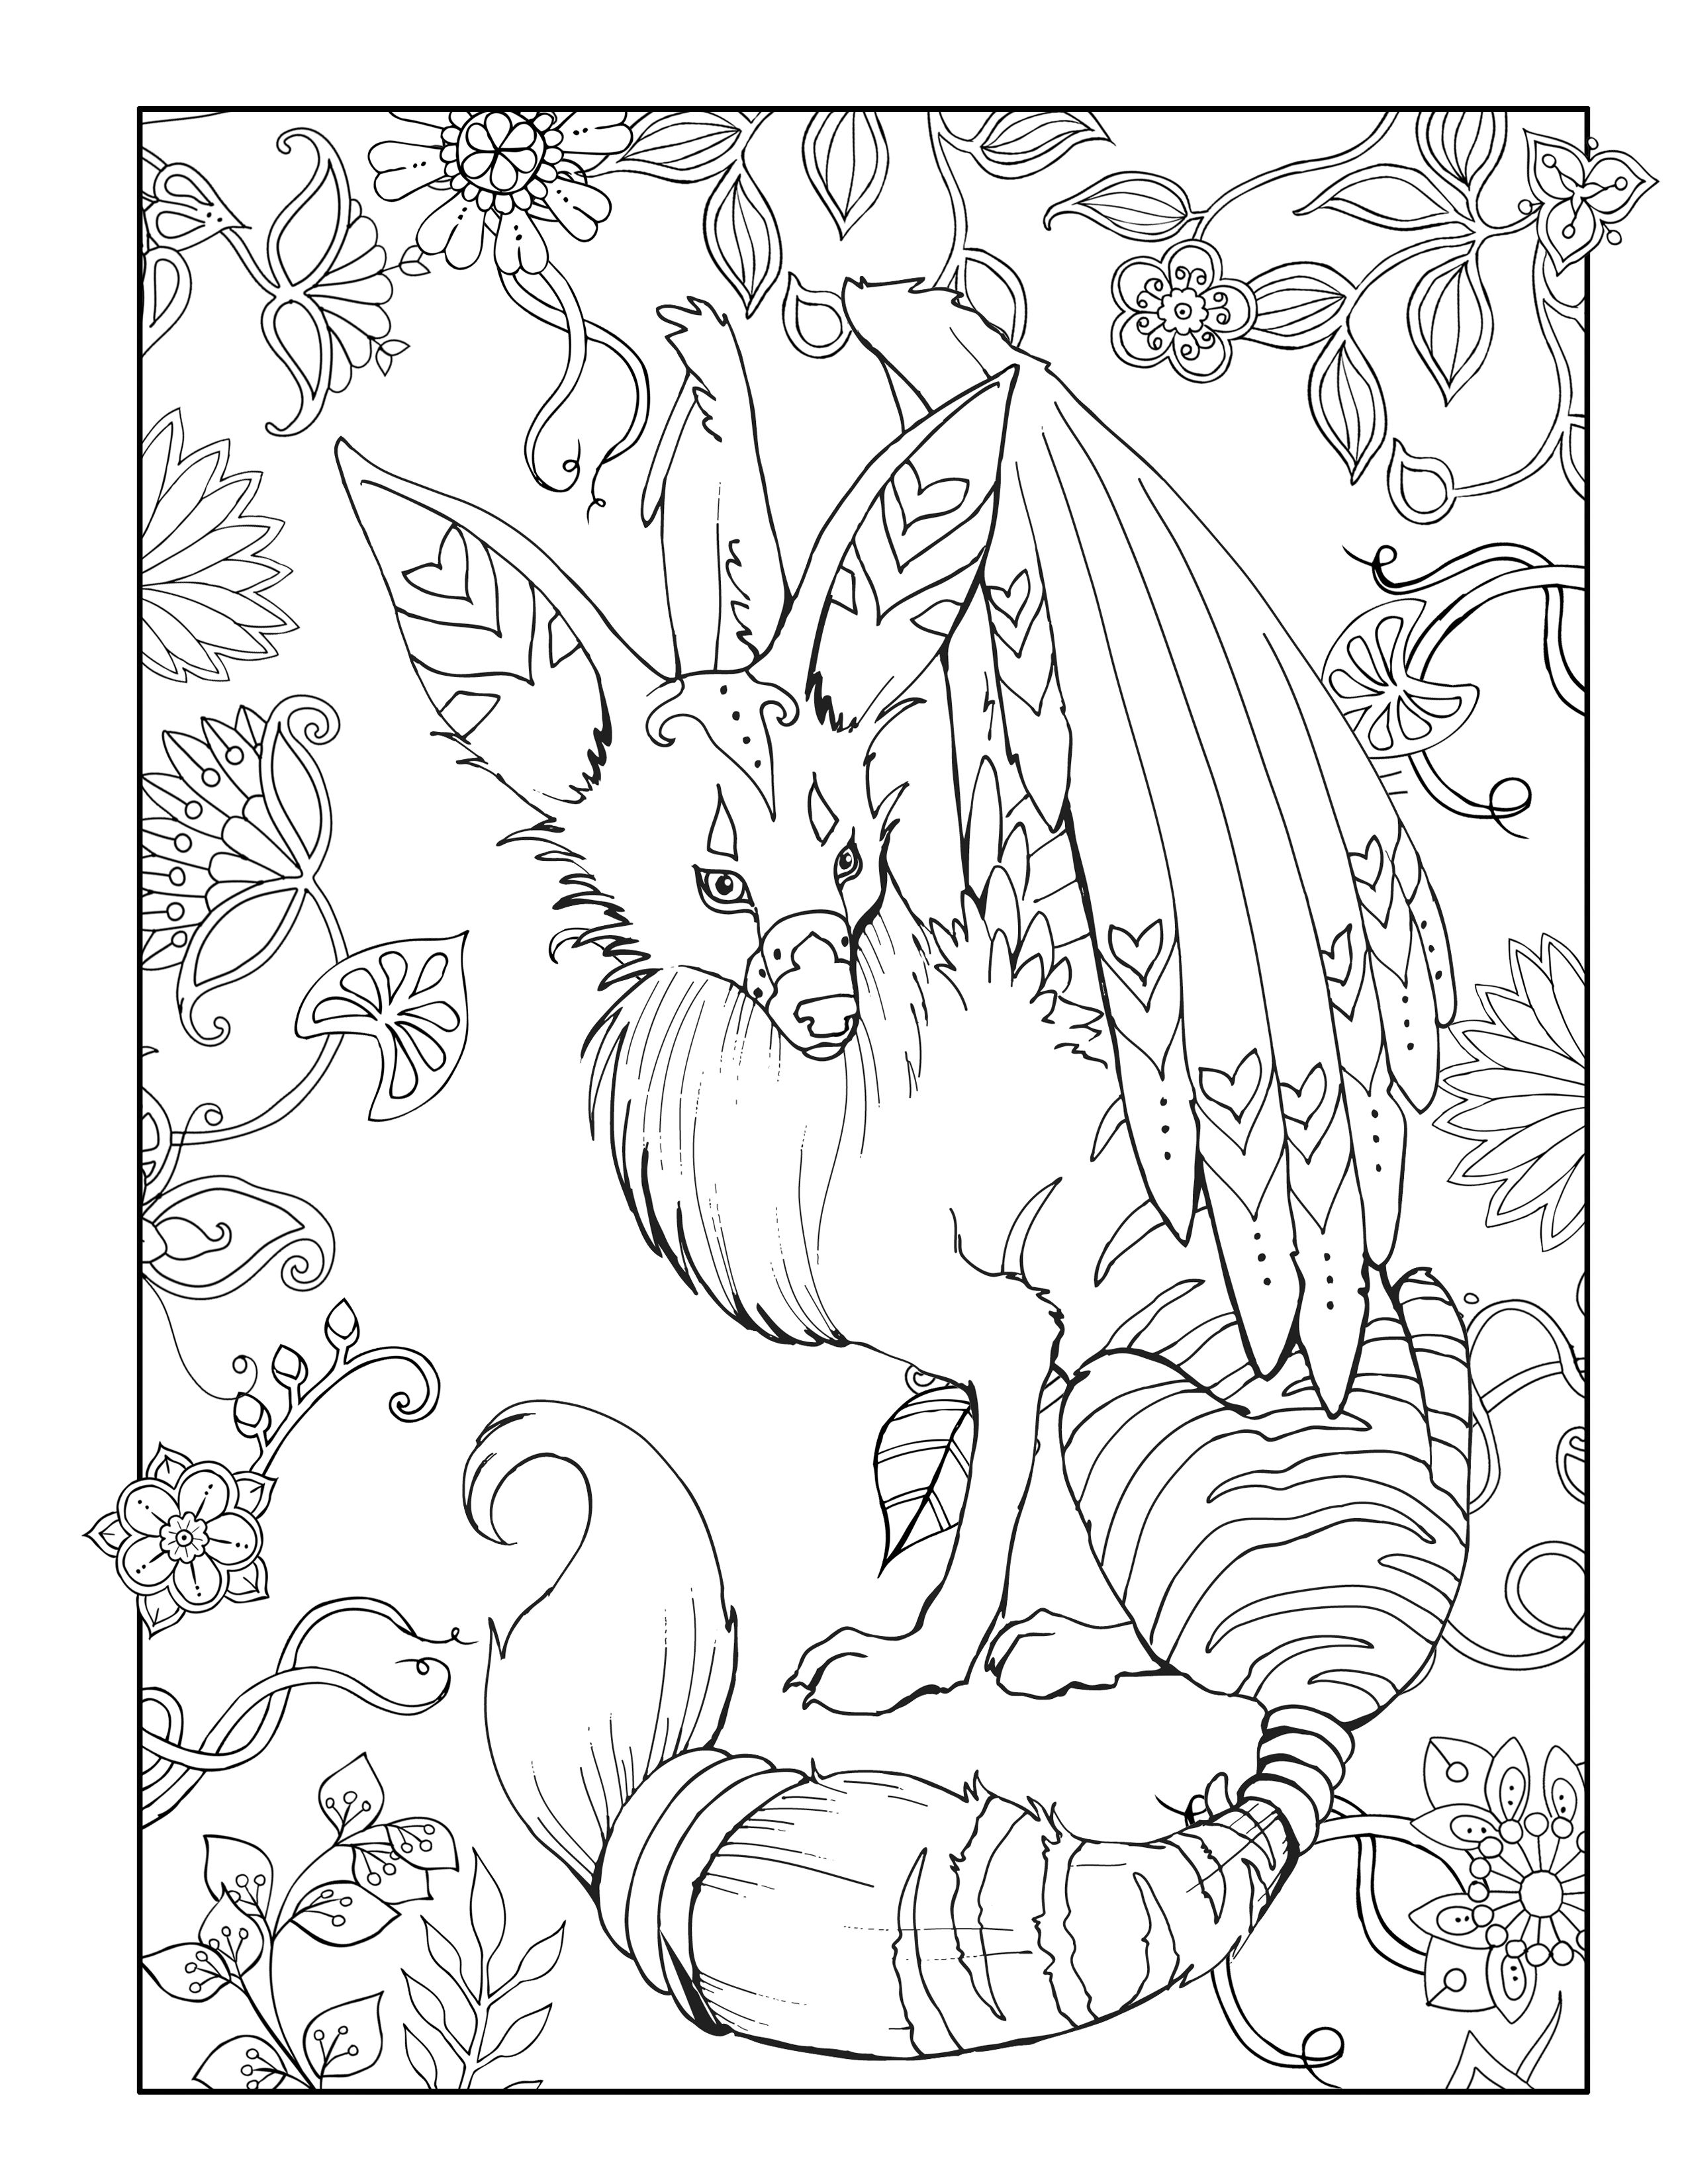 Do you love mythical animals this adult coloring page is from magical kingdom this book â animal coloring pages detailed coloring pages dragon coloring page